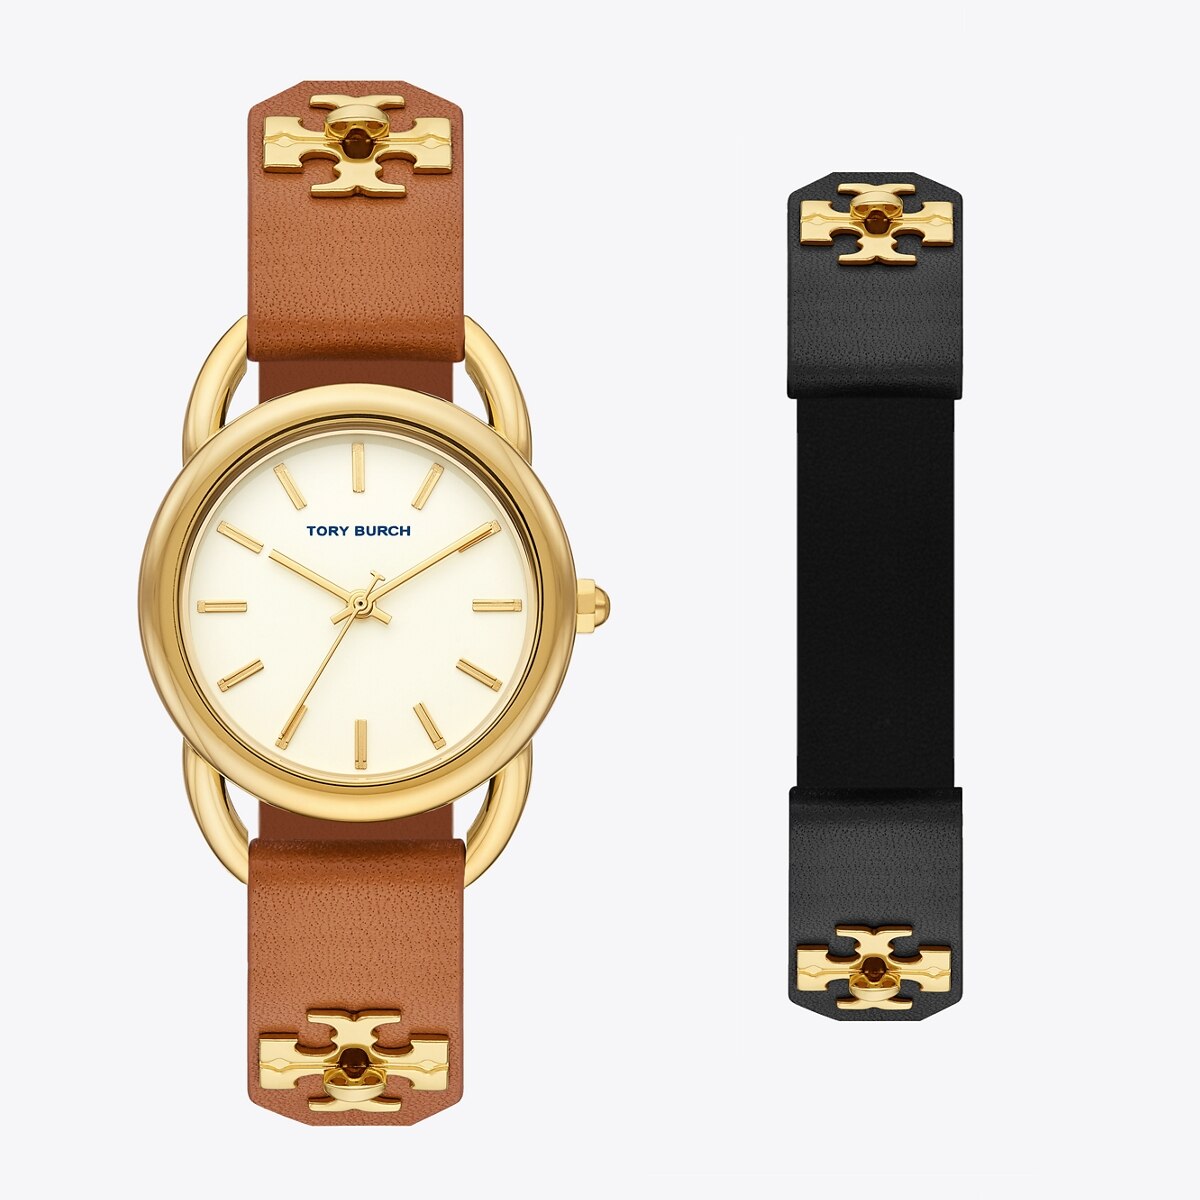 Ravello Watch Gift Set, Black/Brown Leather, Gold-Tone Stainless Steel, 32  MM : Women's Designer Strap Watches | Tory Burch